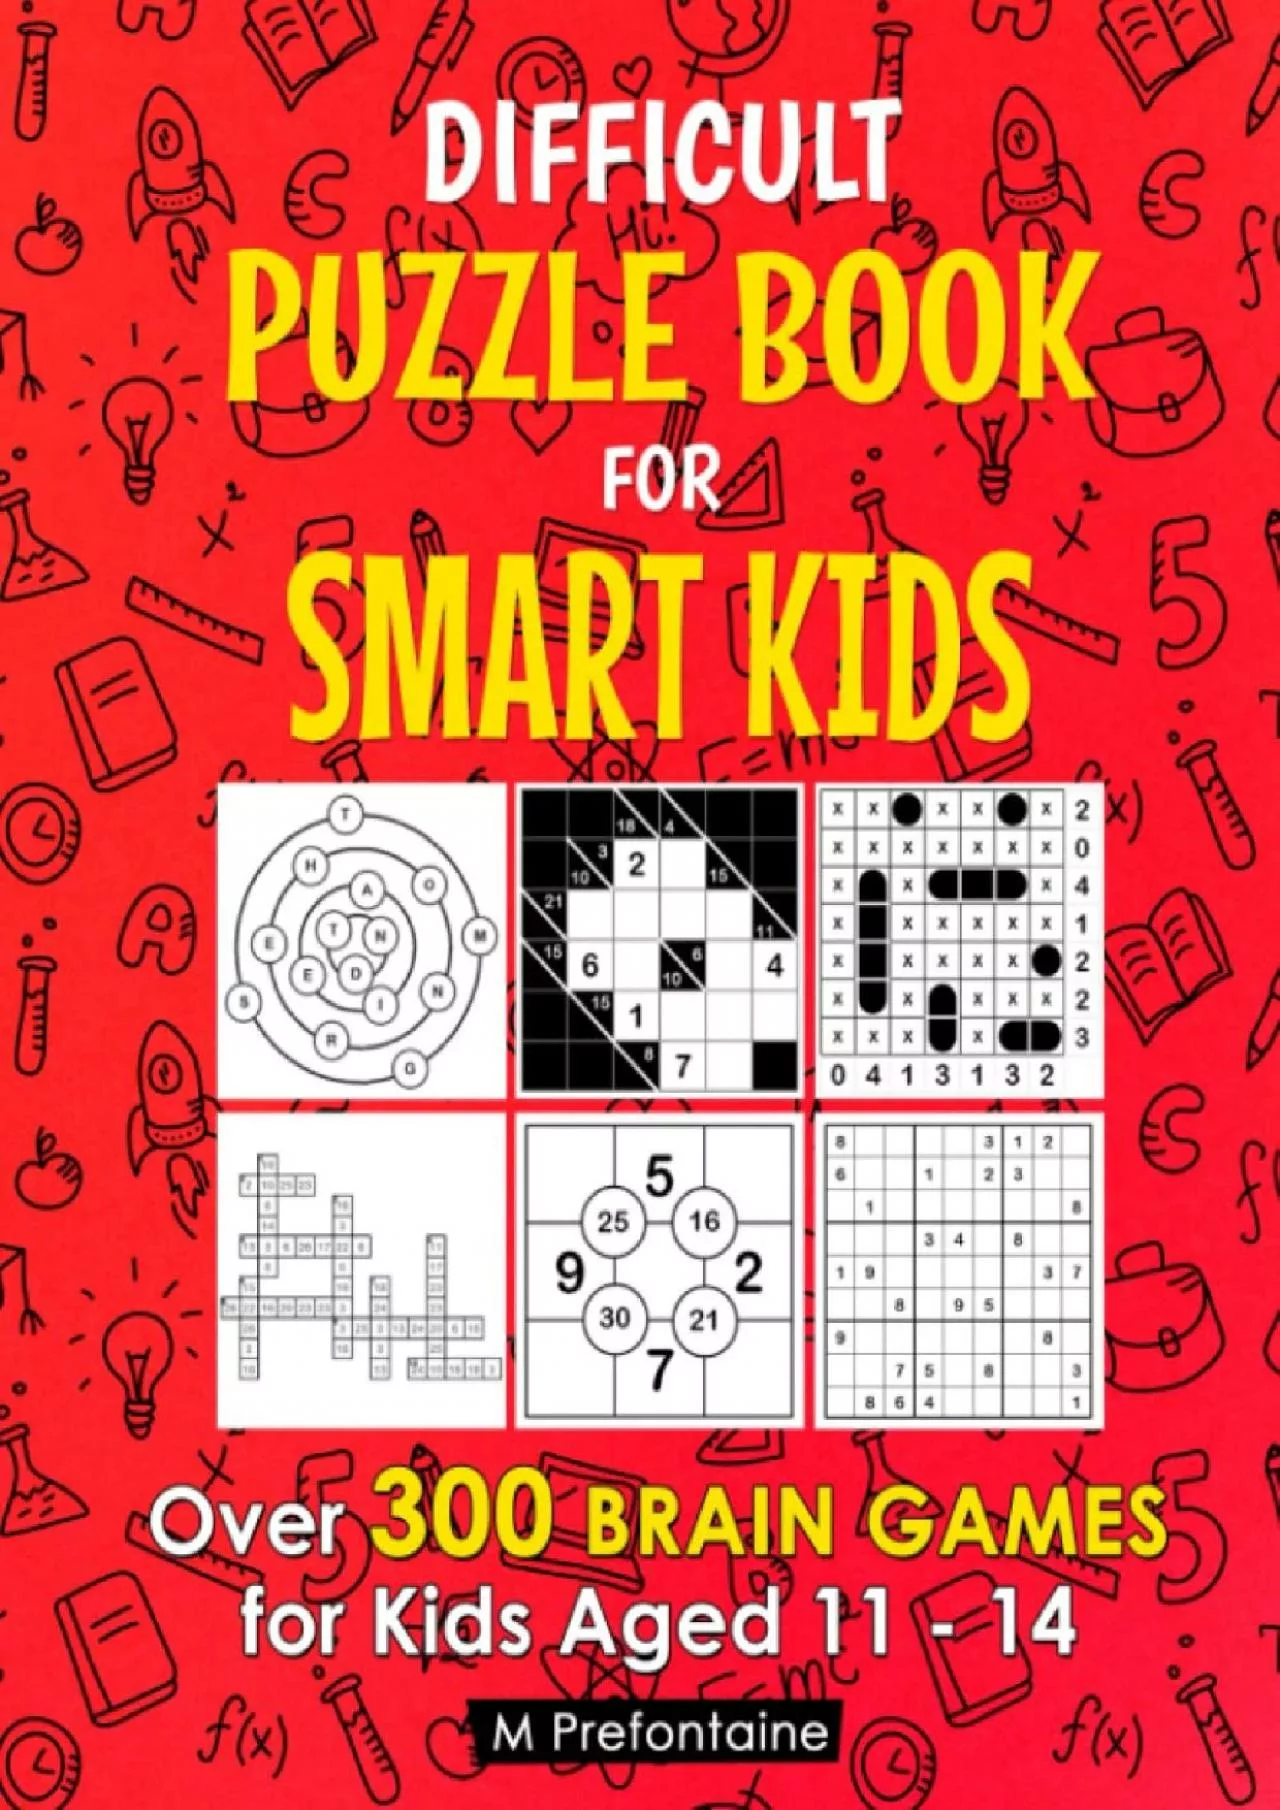 [DOWNLOAD] Difficult Puzzle Book for Smart Kids: Over 300 Brain Games for Kids Aged 11